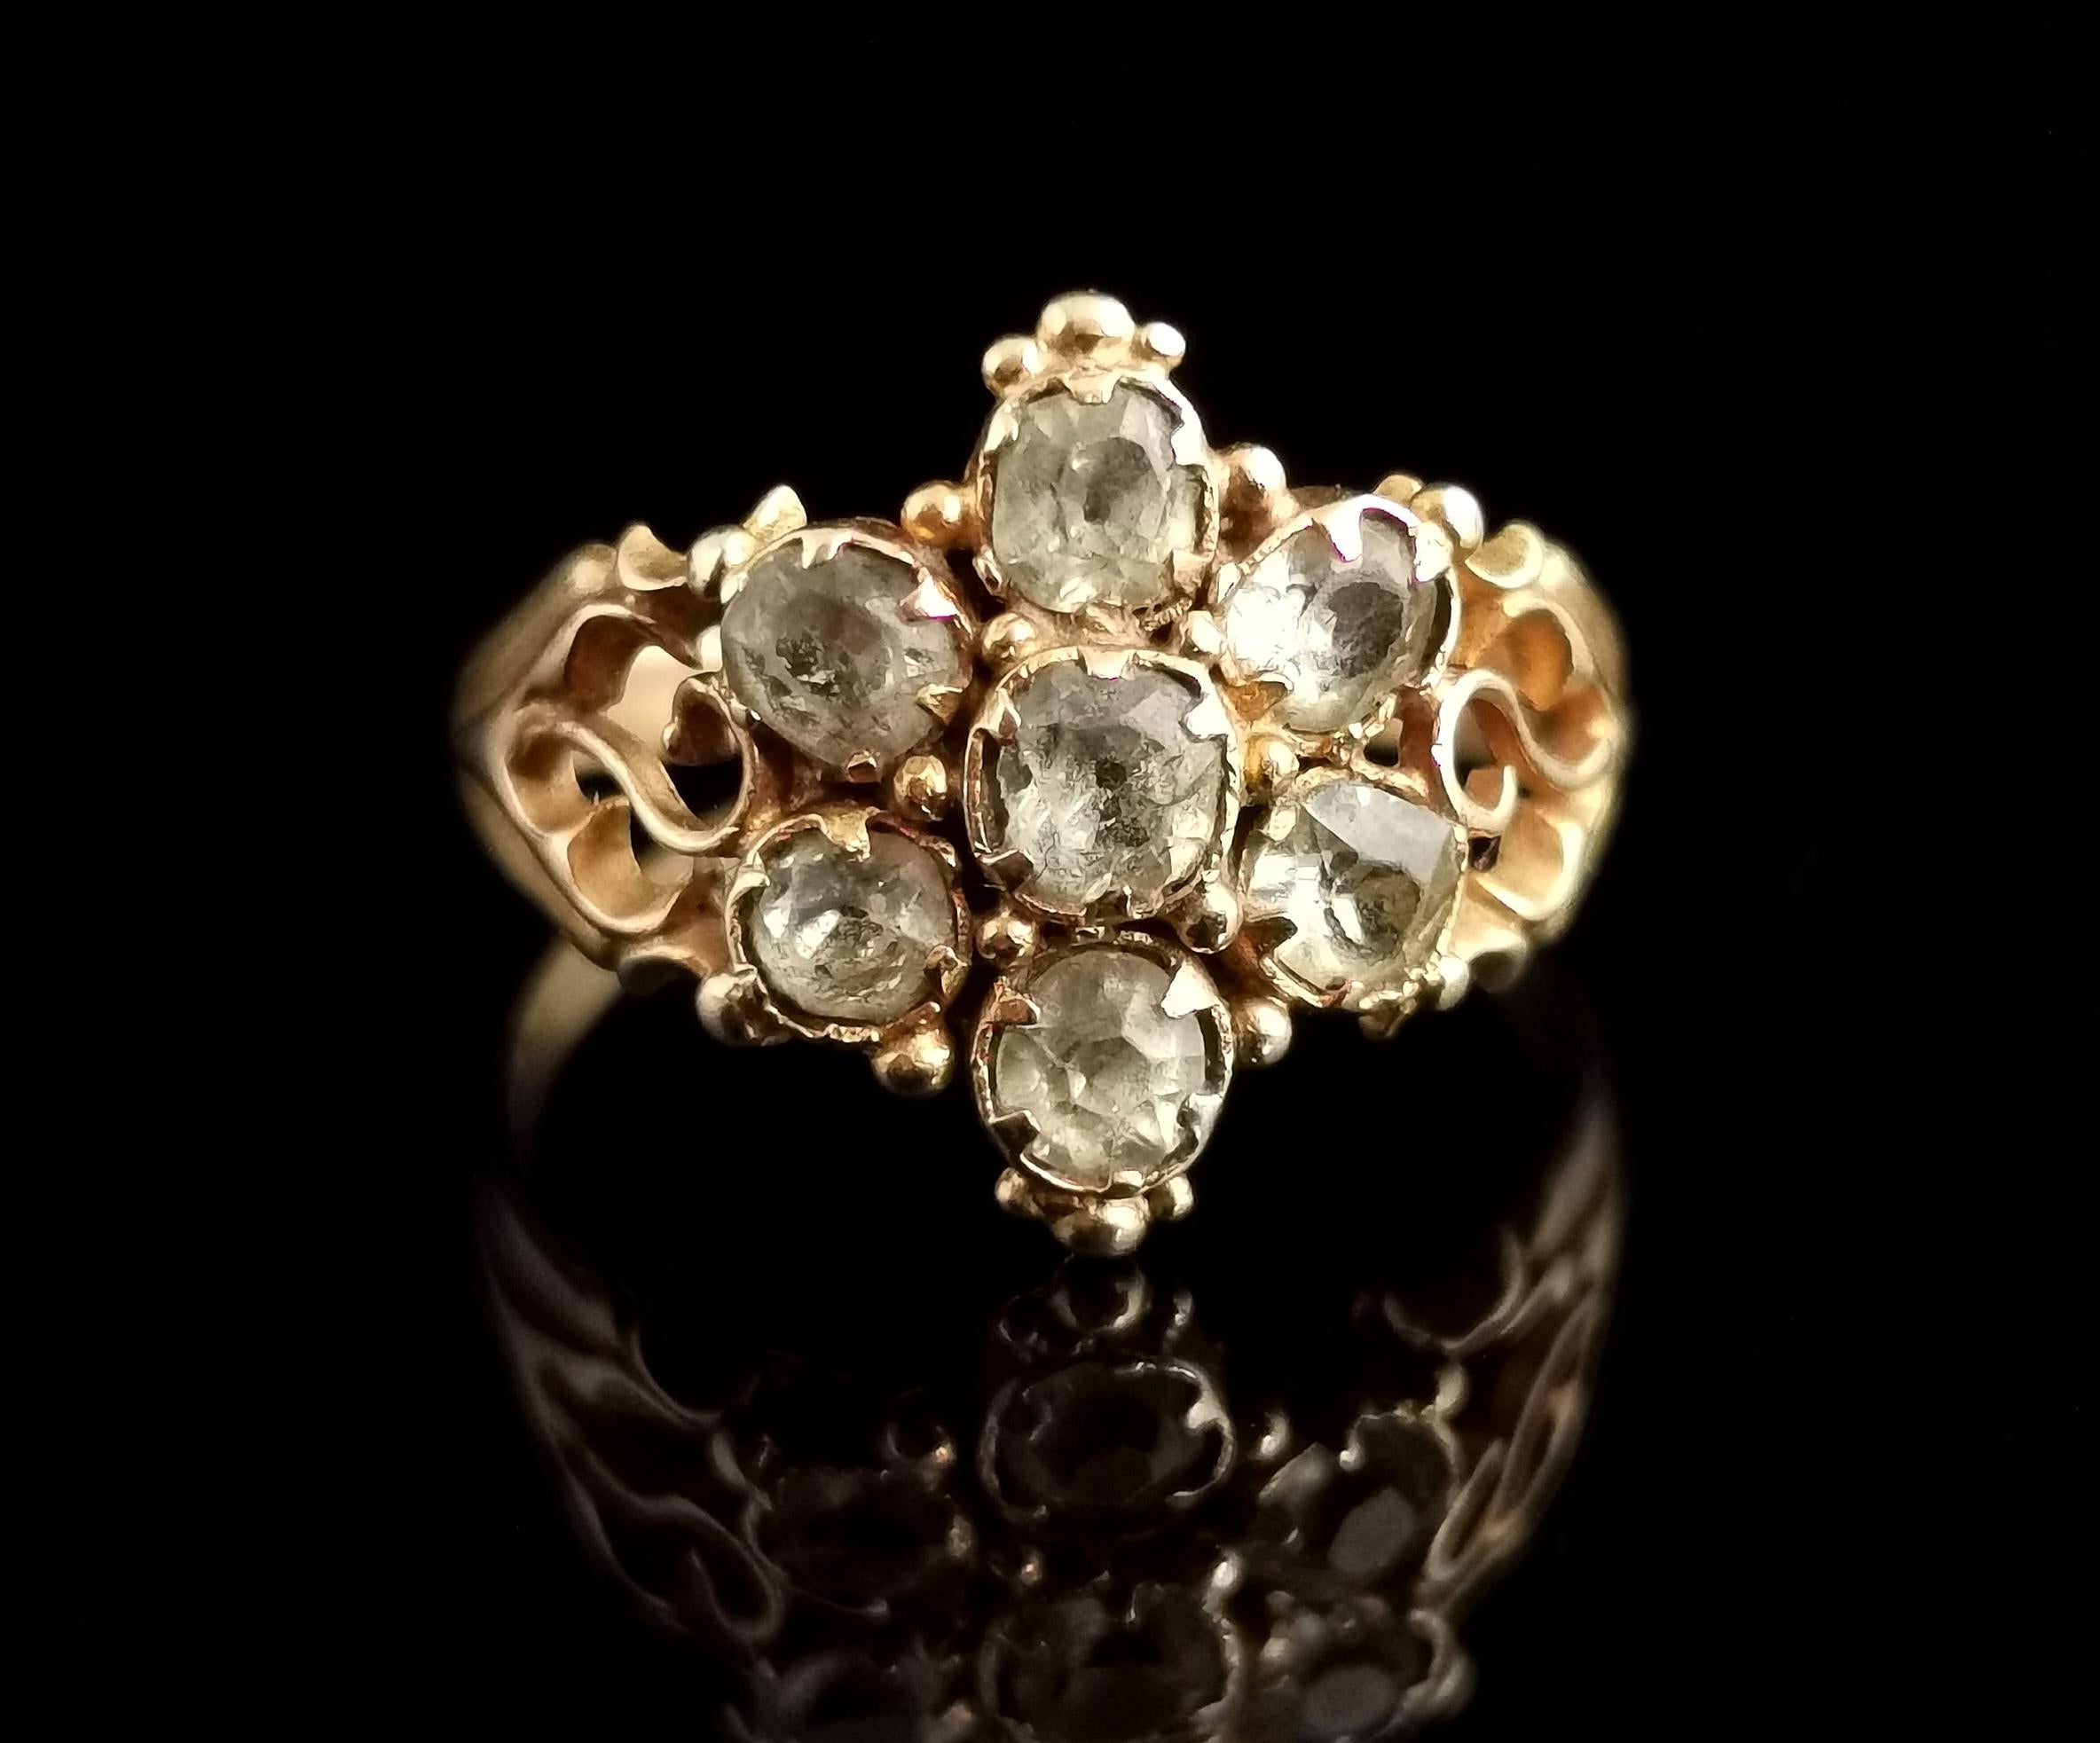 A stunning antique early Victorian era Topaz cluster ring in 18 karat yellow gold.

A very pretty ring with a central floral design cluster of light green oval and round cut Topaz, claw set to the beautiful rich 18kt yellow gold setting.

The